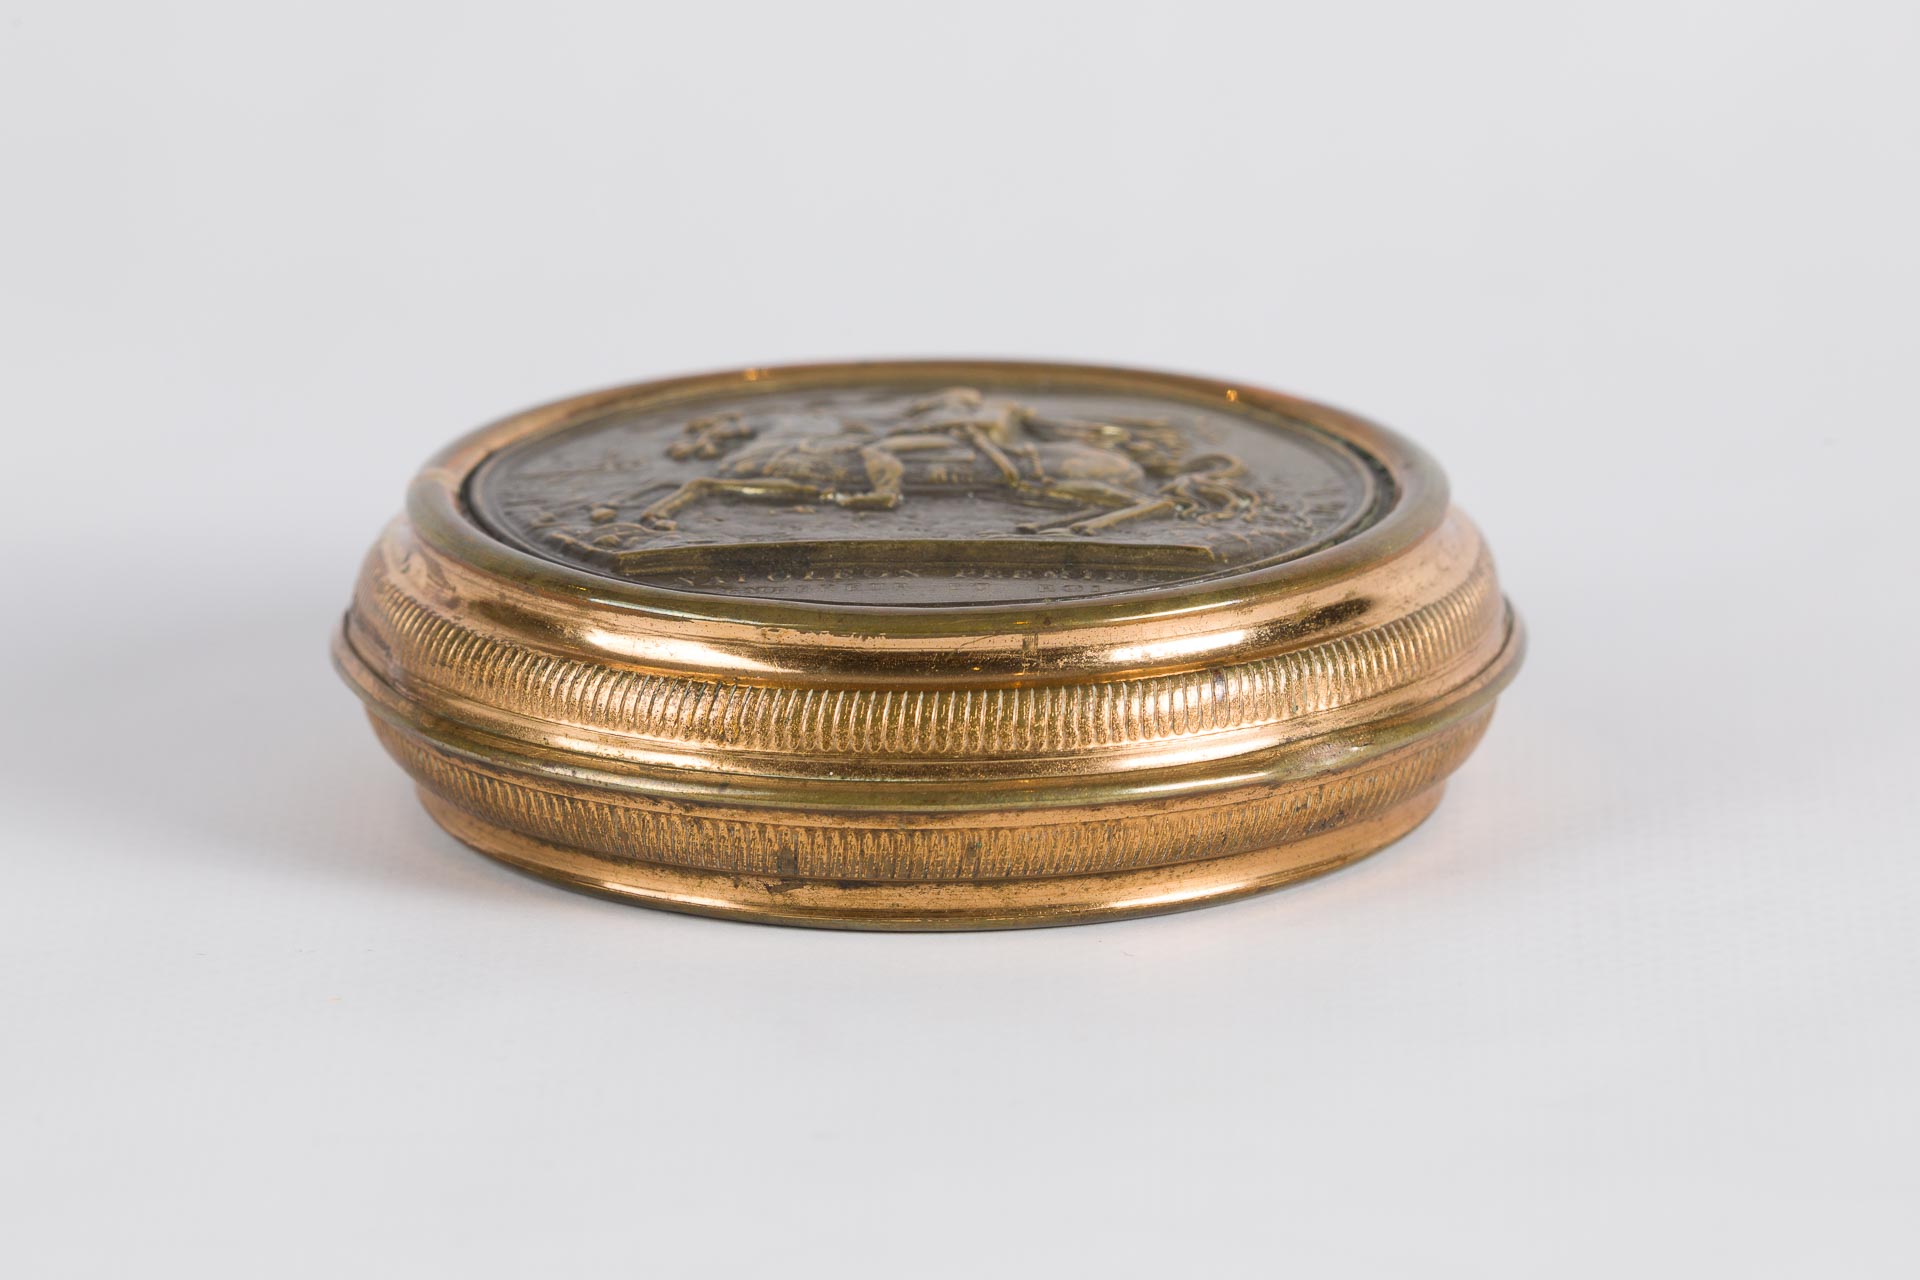 Snuff box, England, 1771-1830  Science Museum Group Collection